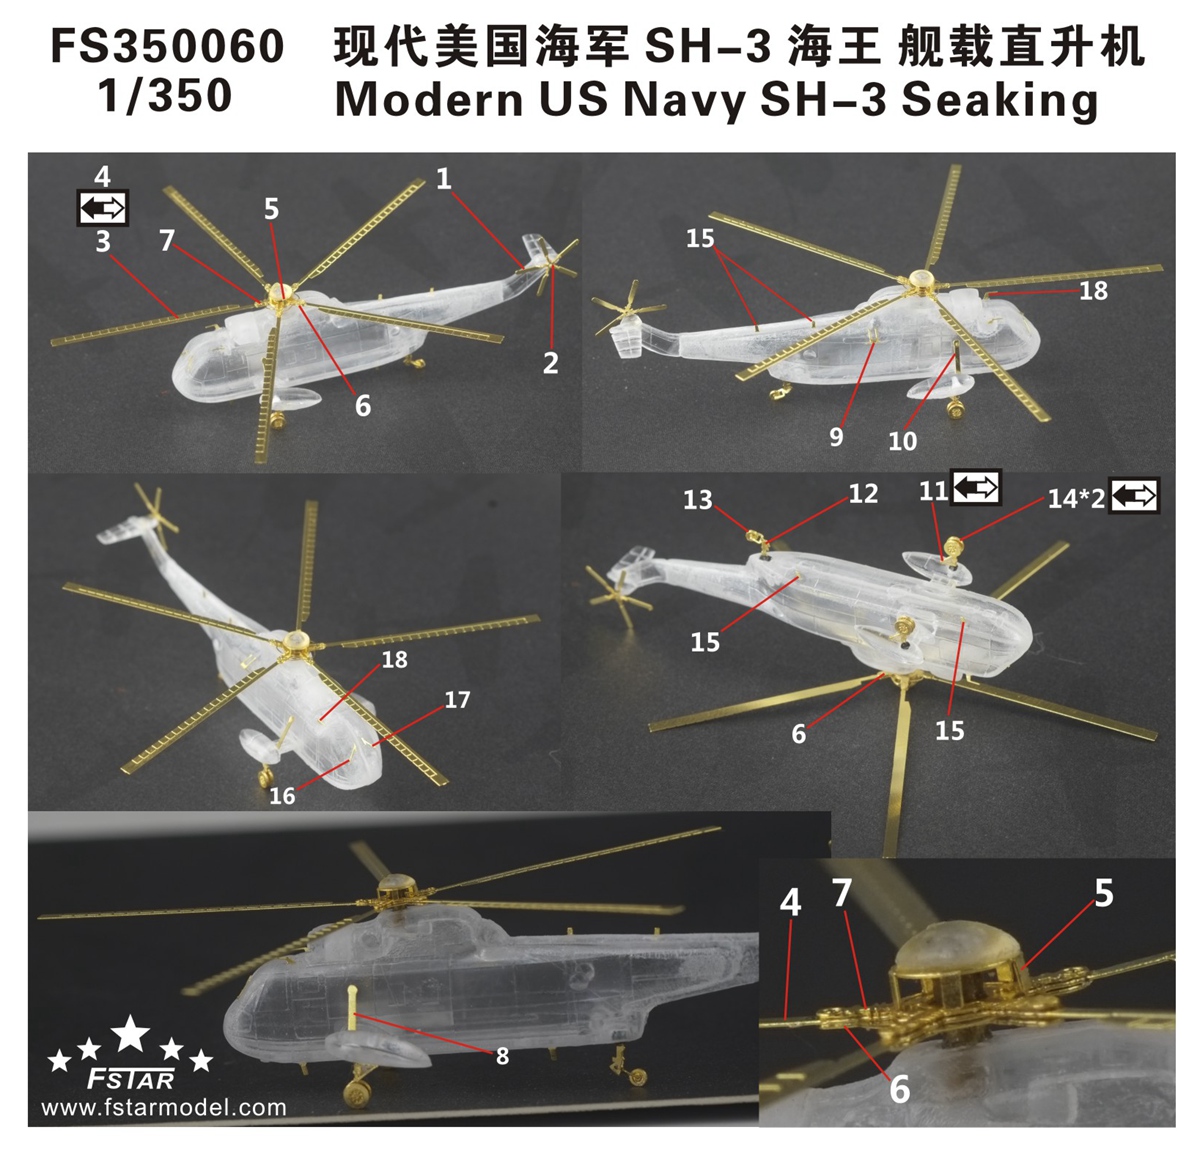 1/350 Modern US Navy SH-3 Seaking Upgrade Set for Trumpeter - Click Image to Close